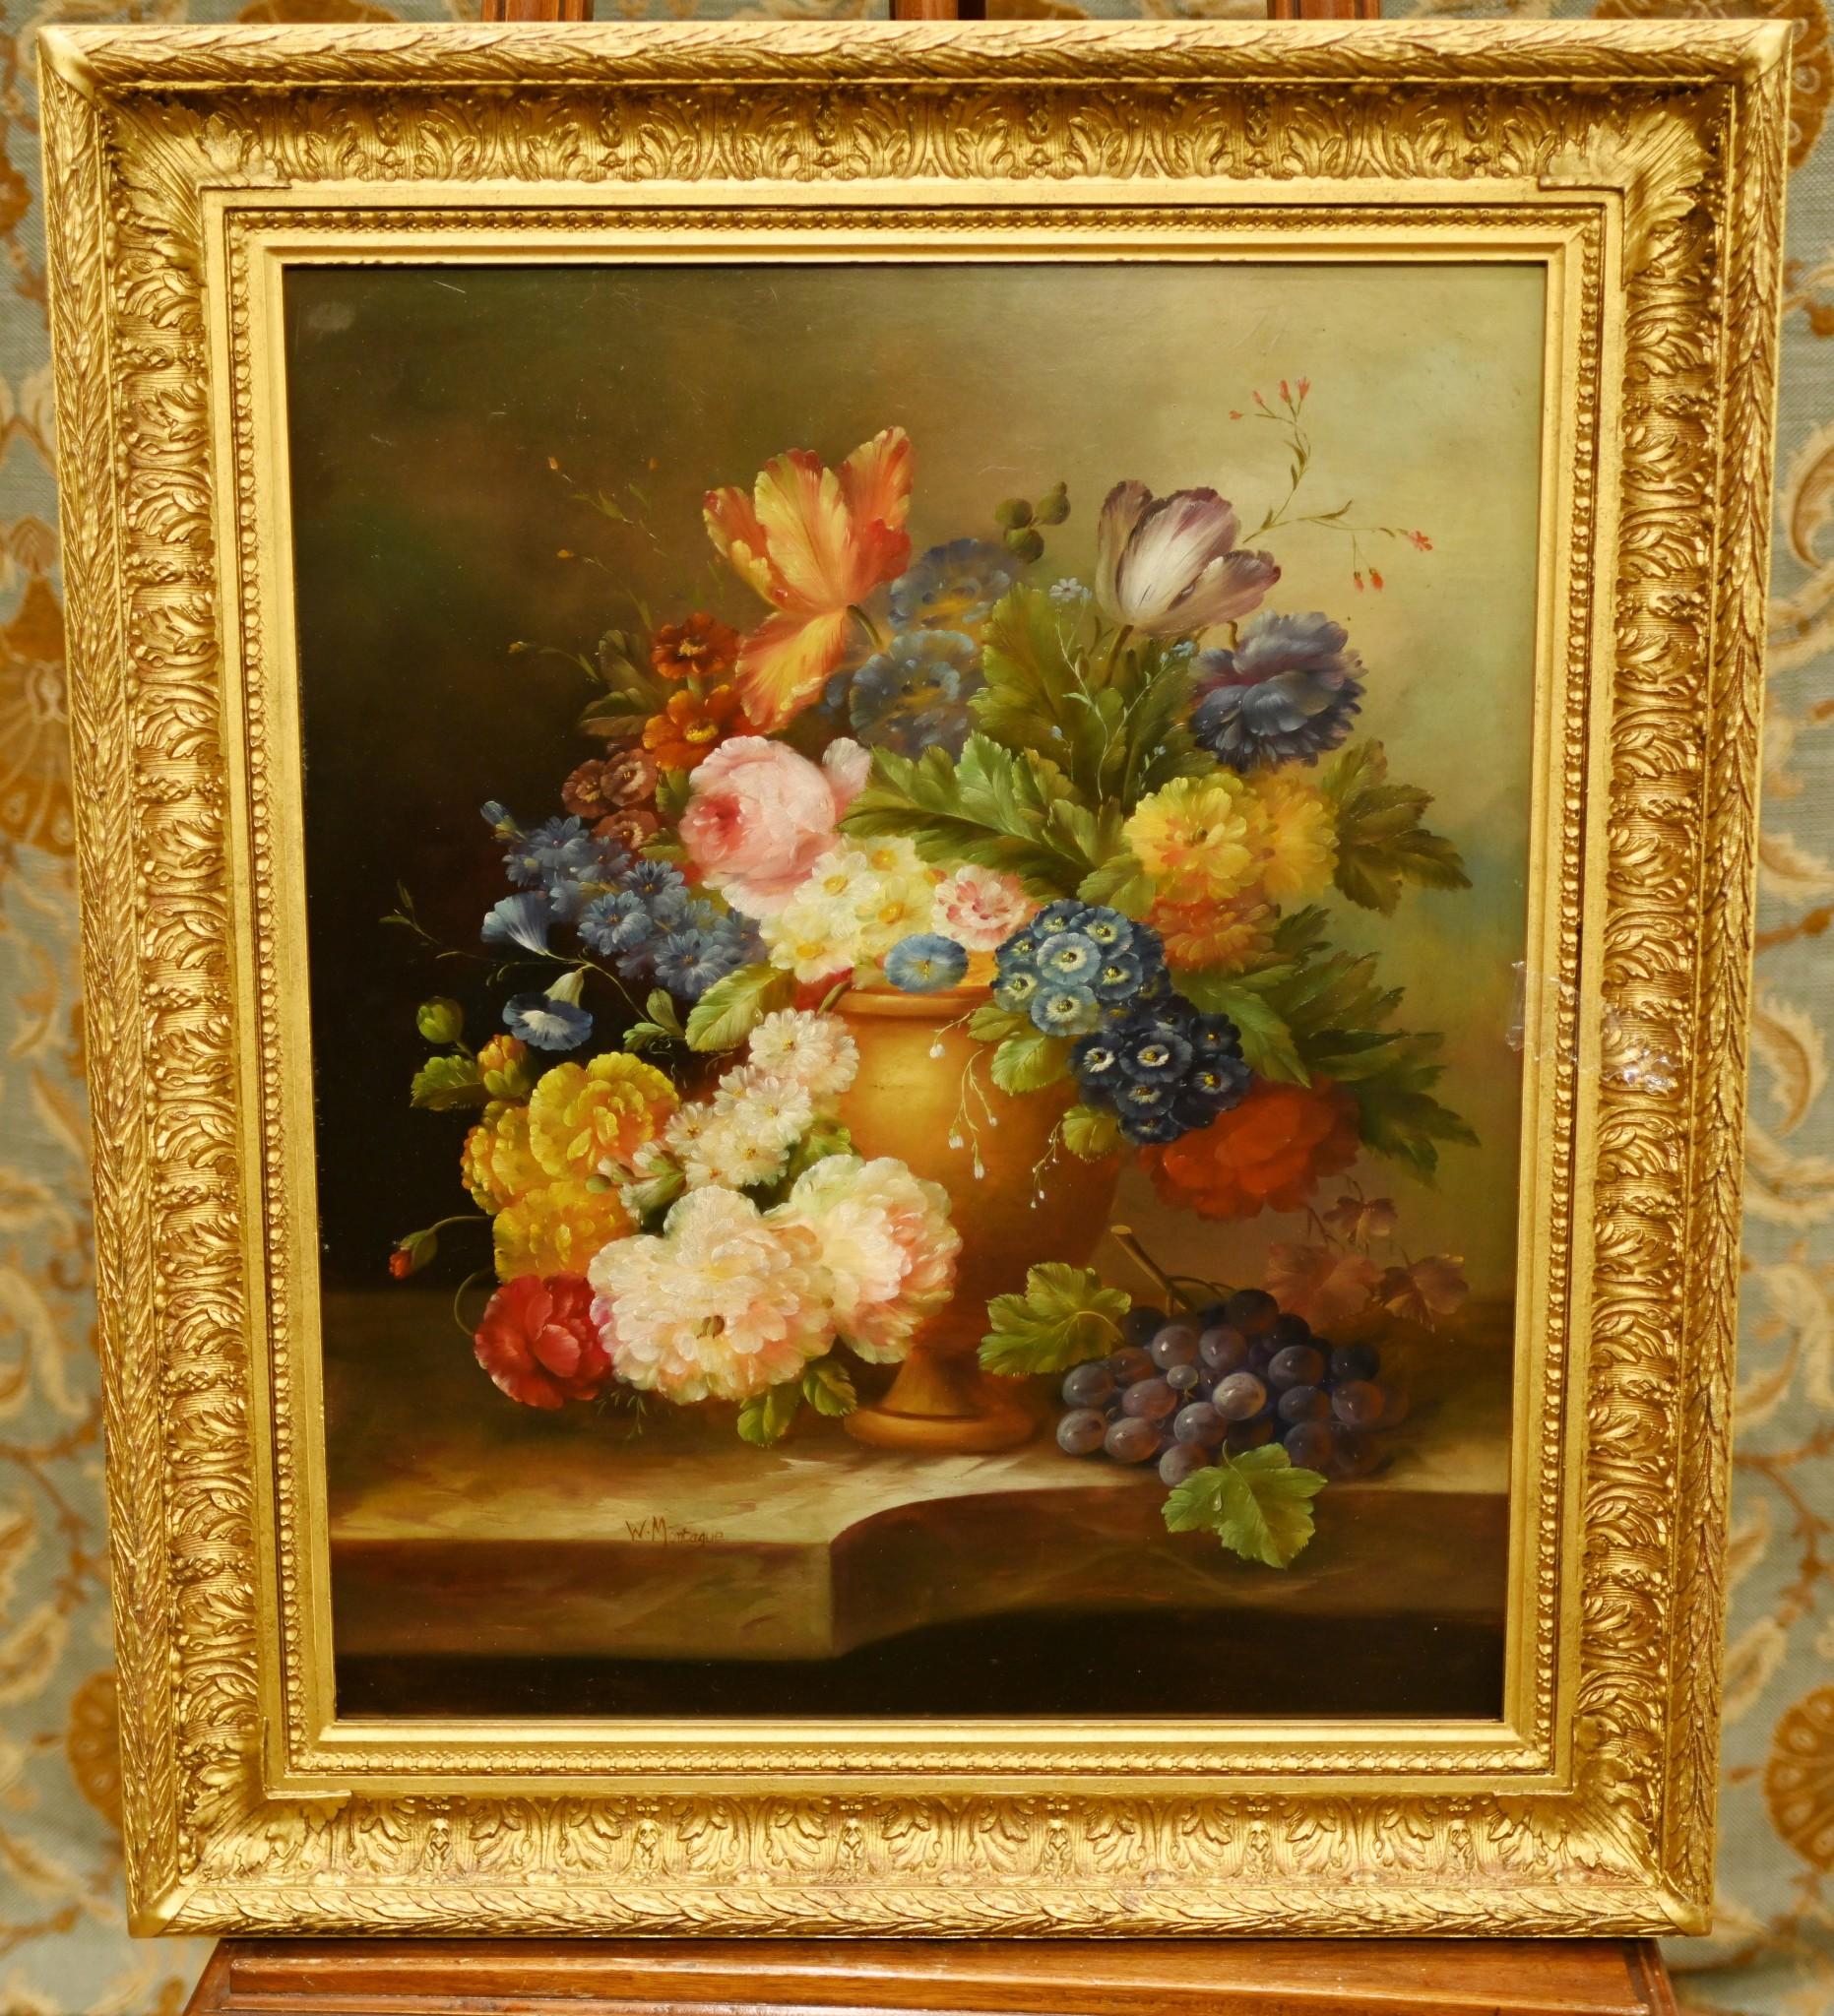 Eye catching Edwardian style oil painting of a vivid floral spray
This would add light and energy to any interior
Brushwork is incredibly detailed and look at the colours to the flowers
Gilt frame very ornate
Piece is signed M Montague in bottom